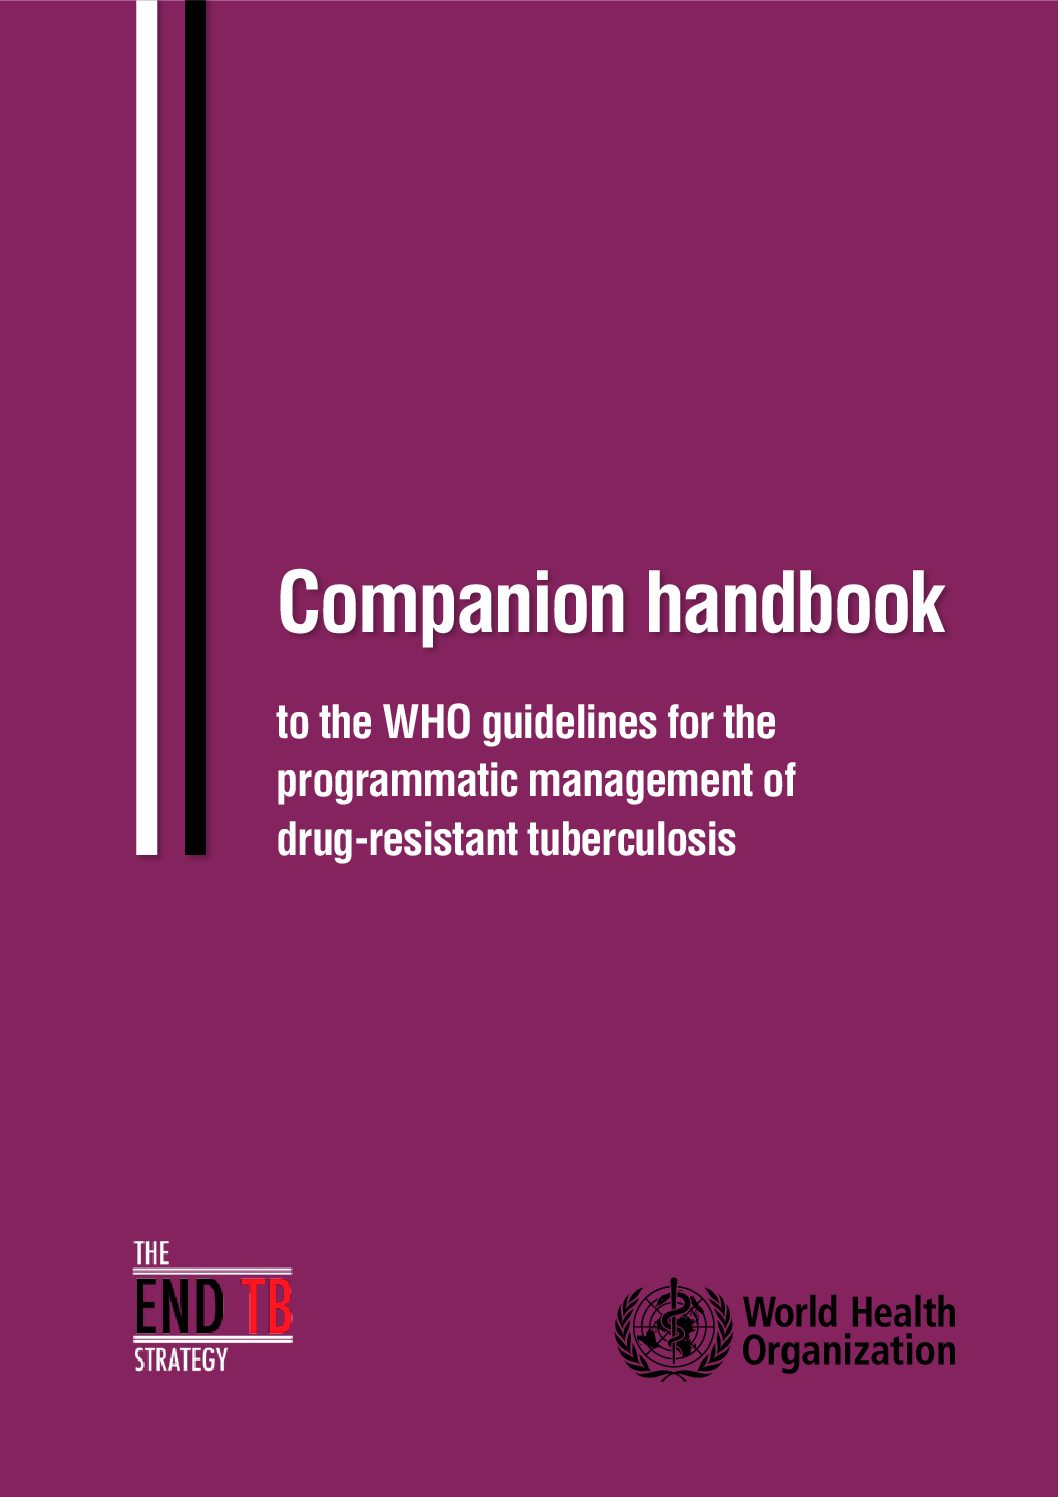 Companion handbook to the WHO guidelines for the programmatic management of drug-resistant tuberculosis.